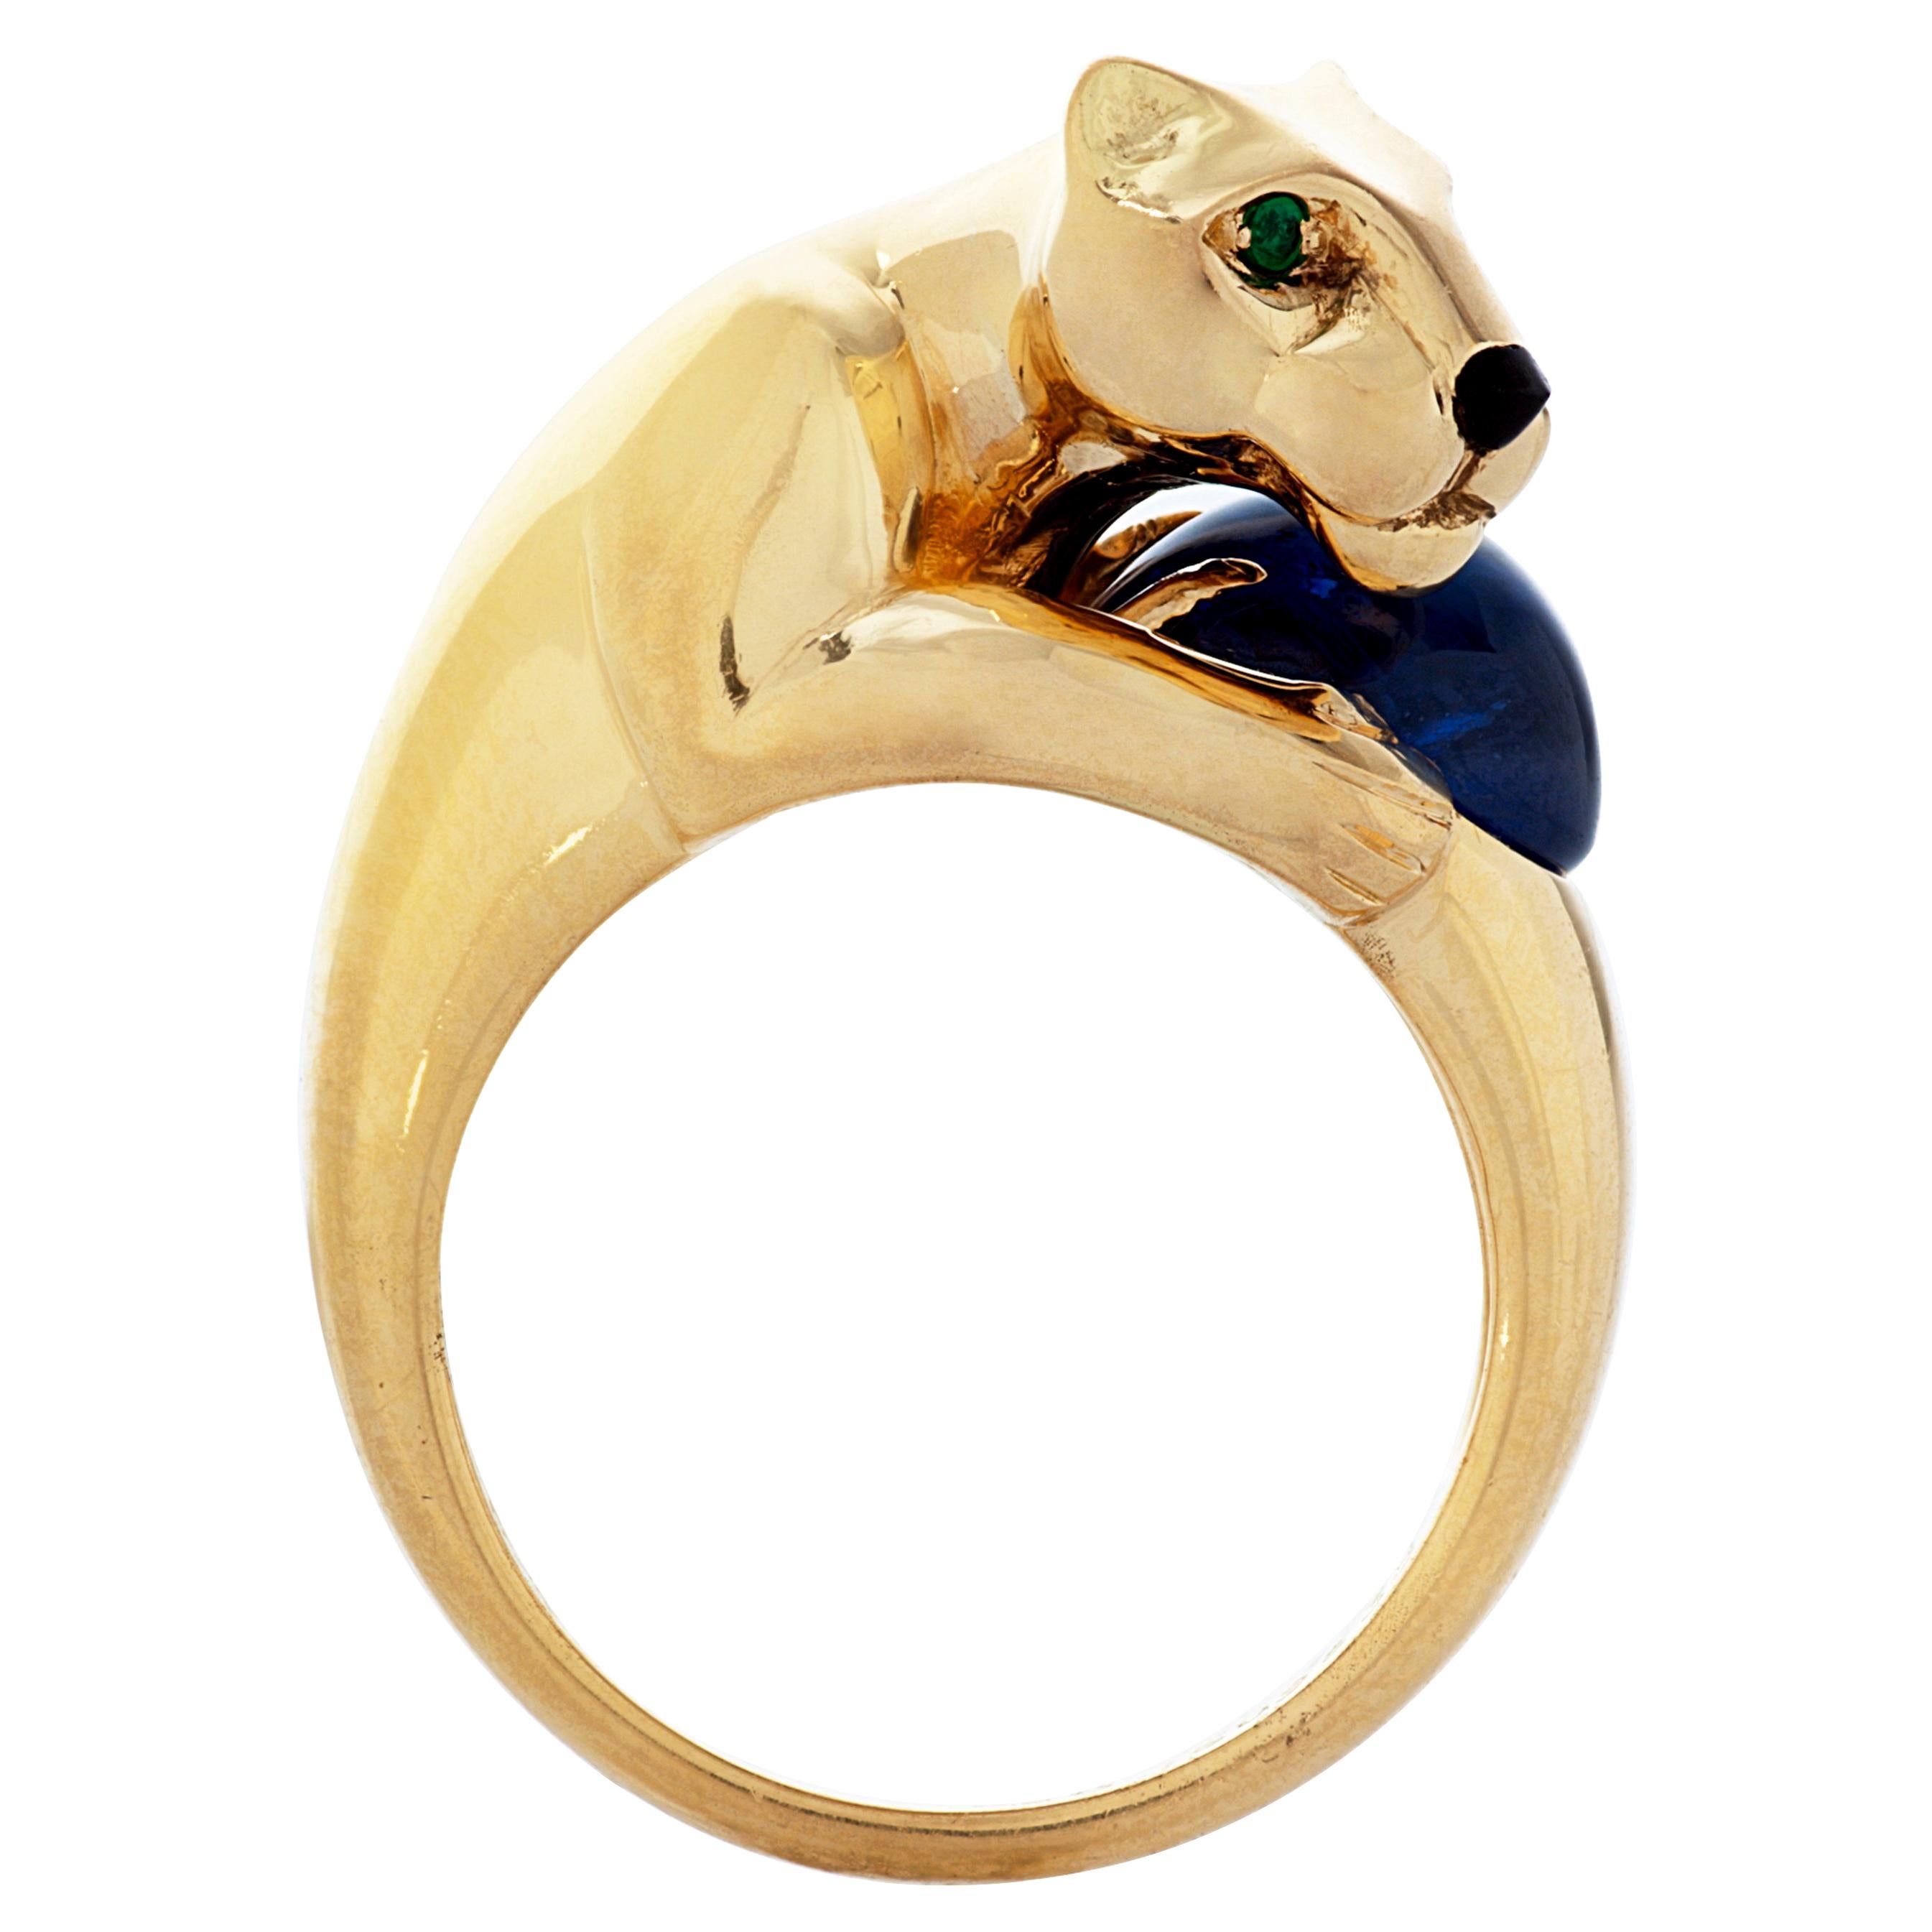 Vintage Panthere De Cartier 4.40 Carat Cabochon Sapphire Ring in 18k Yellow Gold